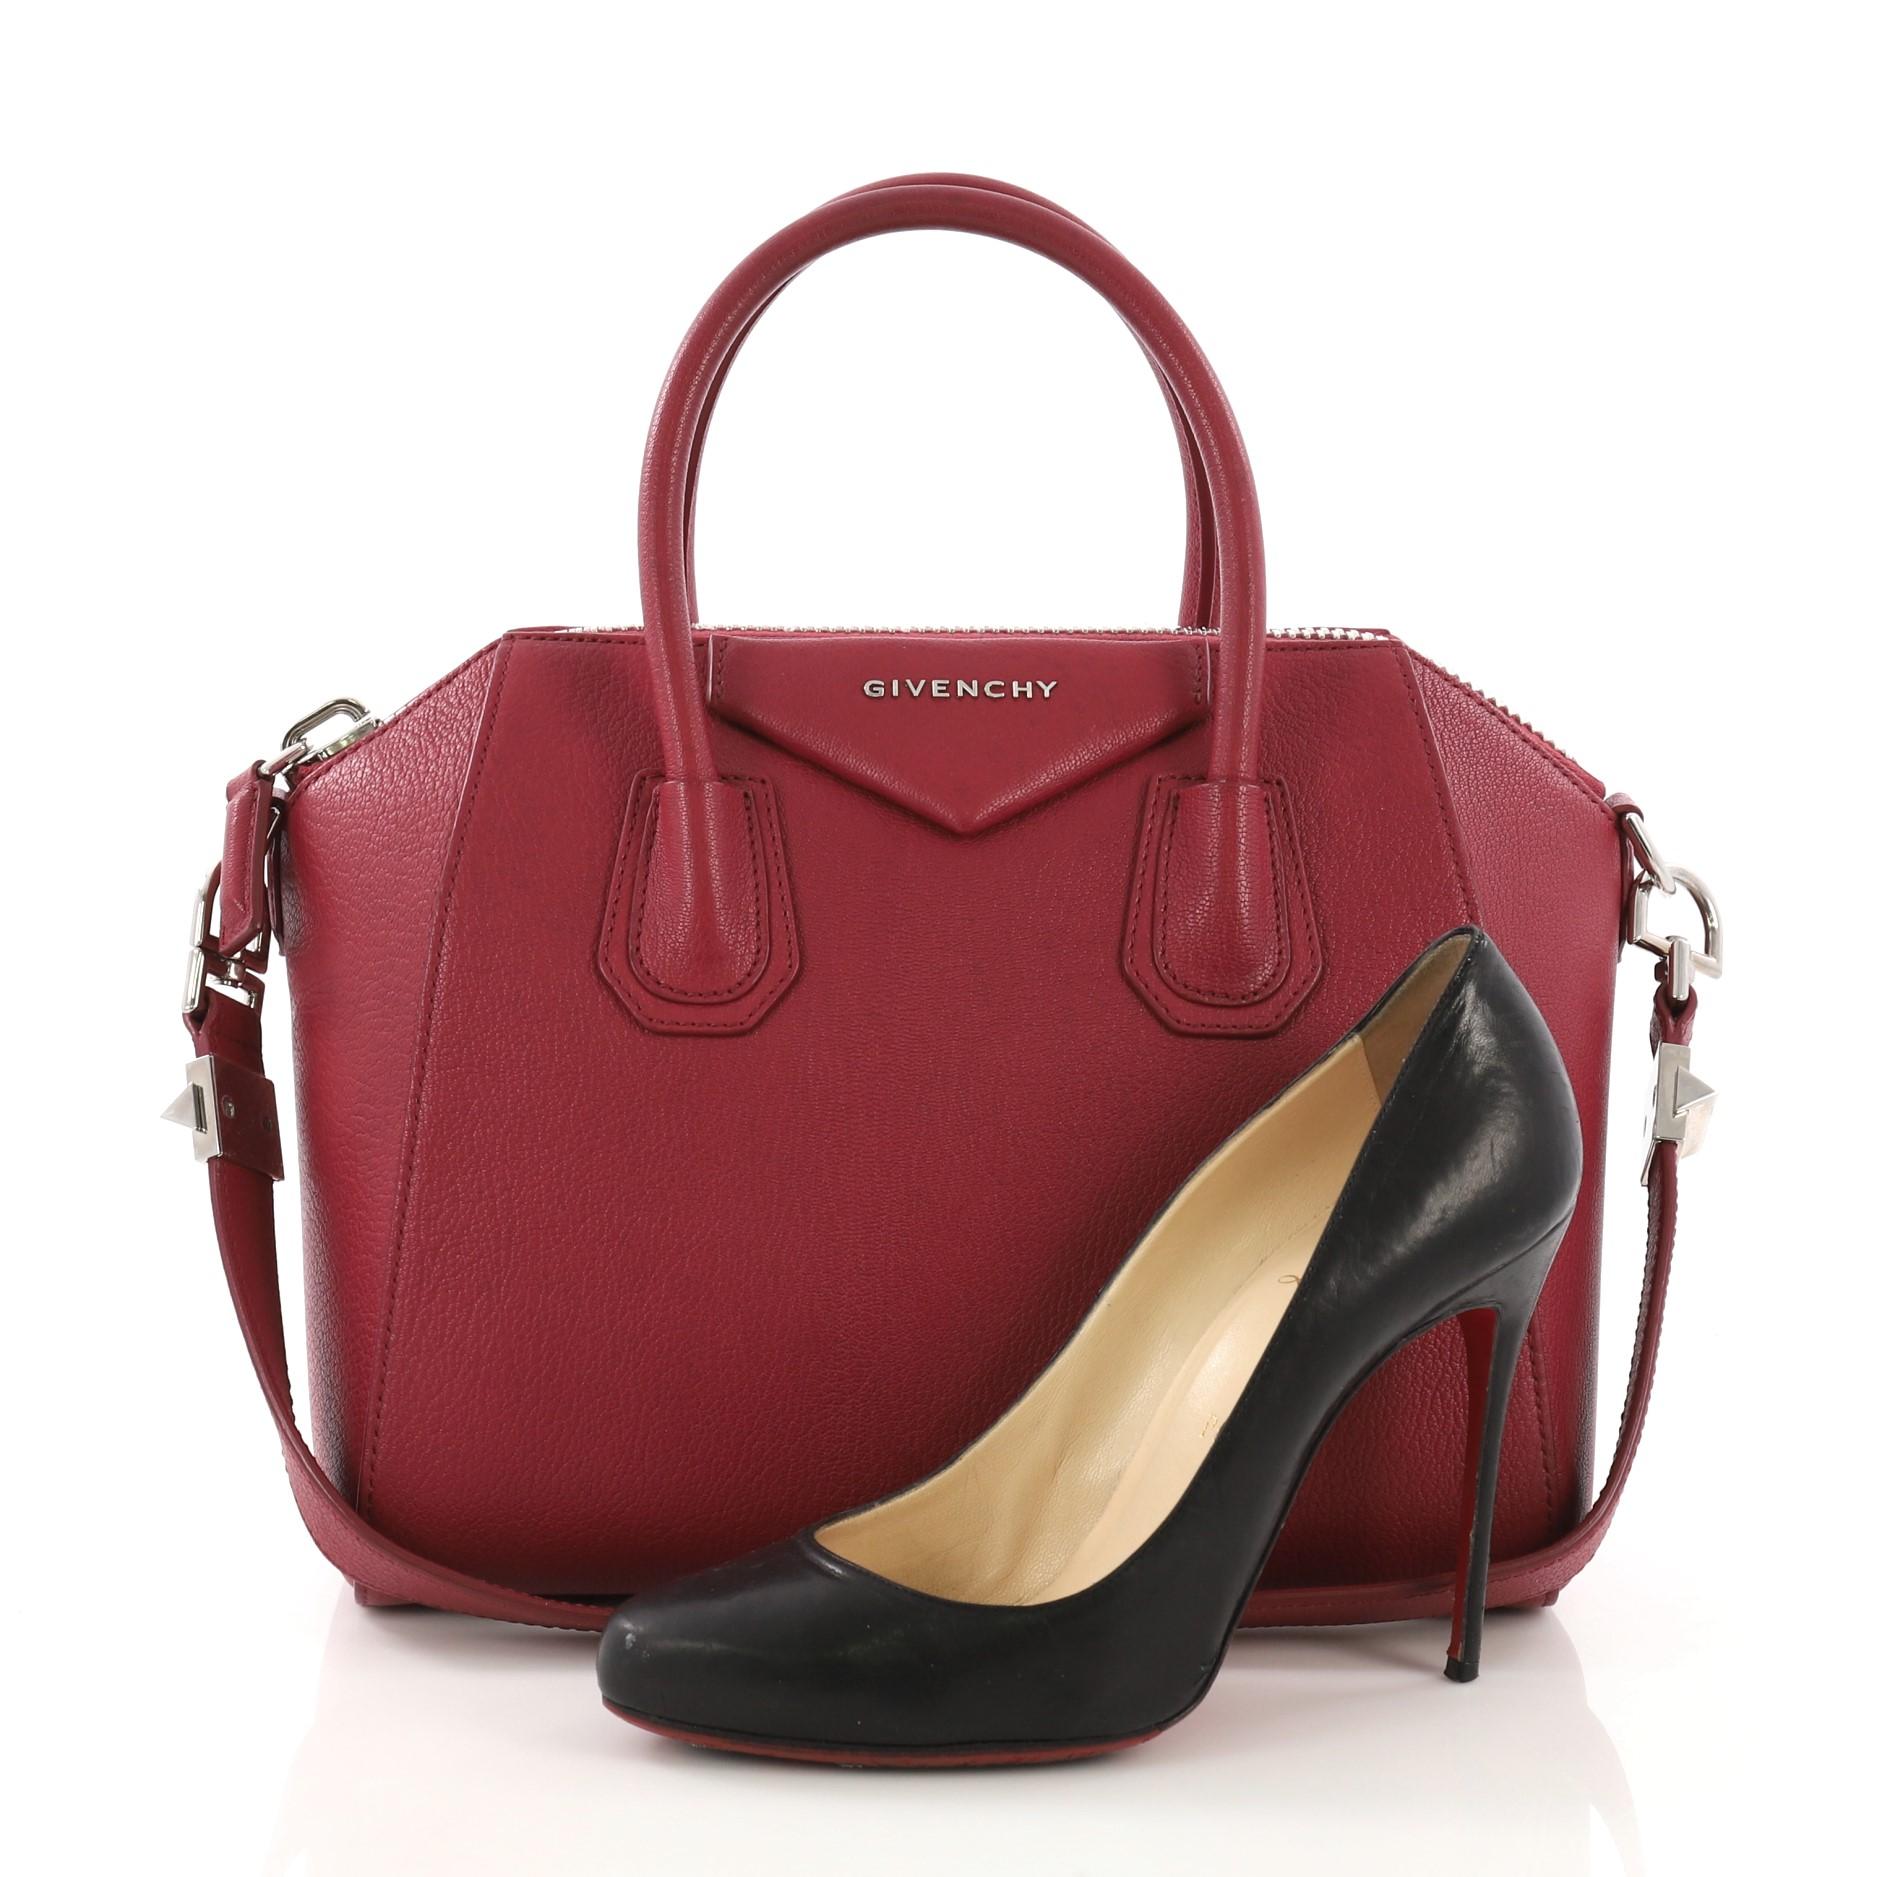 This Givenchy Antigona Bag Leather Small, crafted from fuchsia leather, features dual rolled leather handles and silver-tone hardware. Its zip-around closure opens to a beige fabric interior with zip and slip pockets. **Note: Shoe photographed is